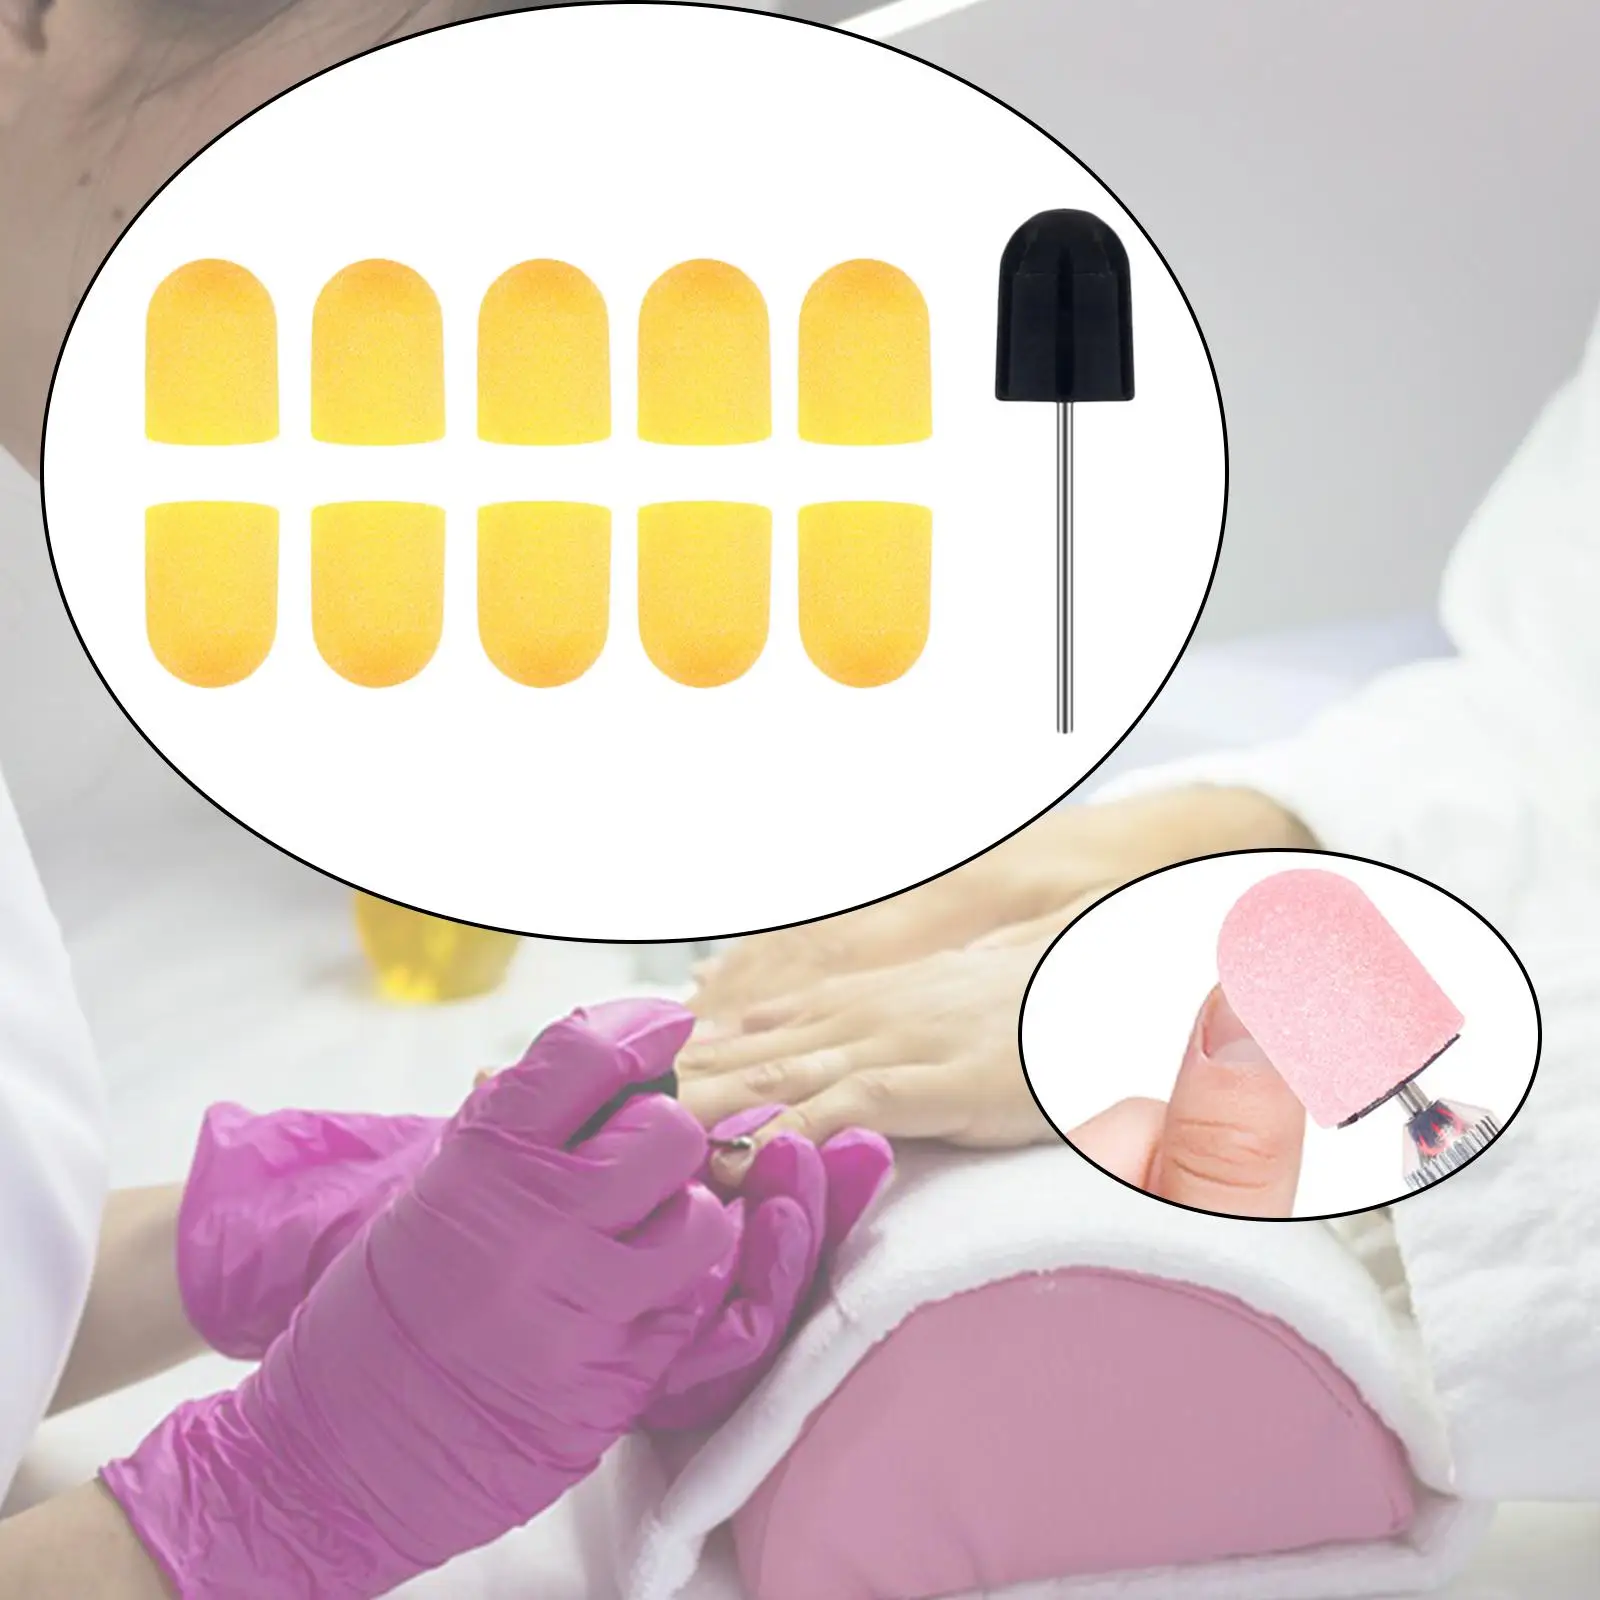 Nail Sanding Caps Bands Professional Sanding Grinding Head for Remover Kit Pedicure Cuticle Tools